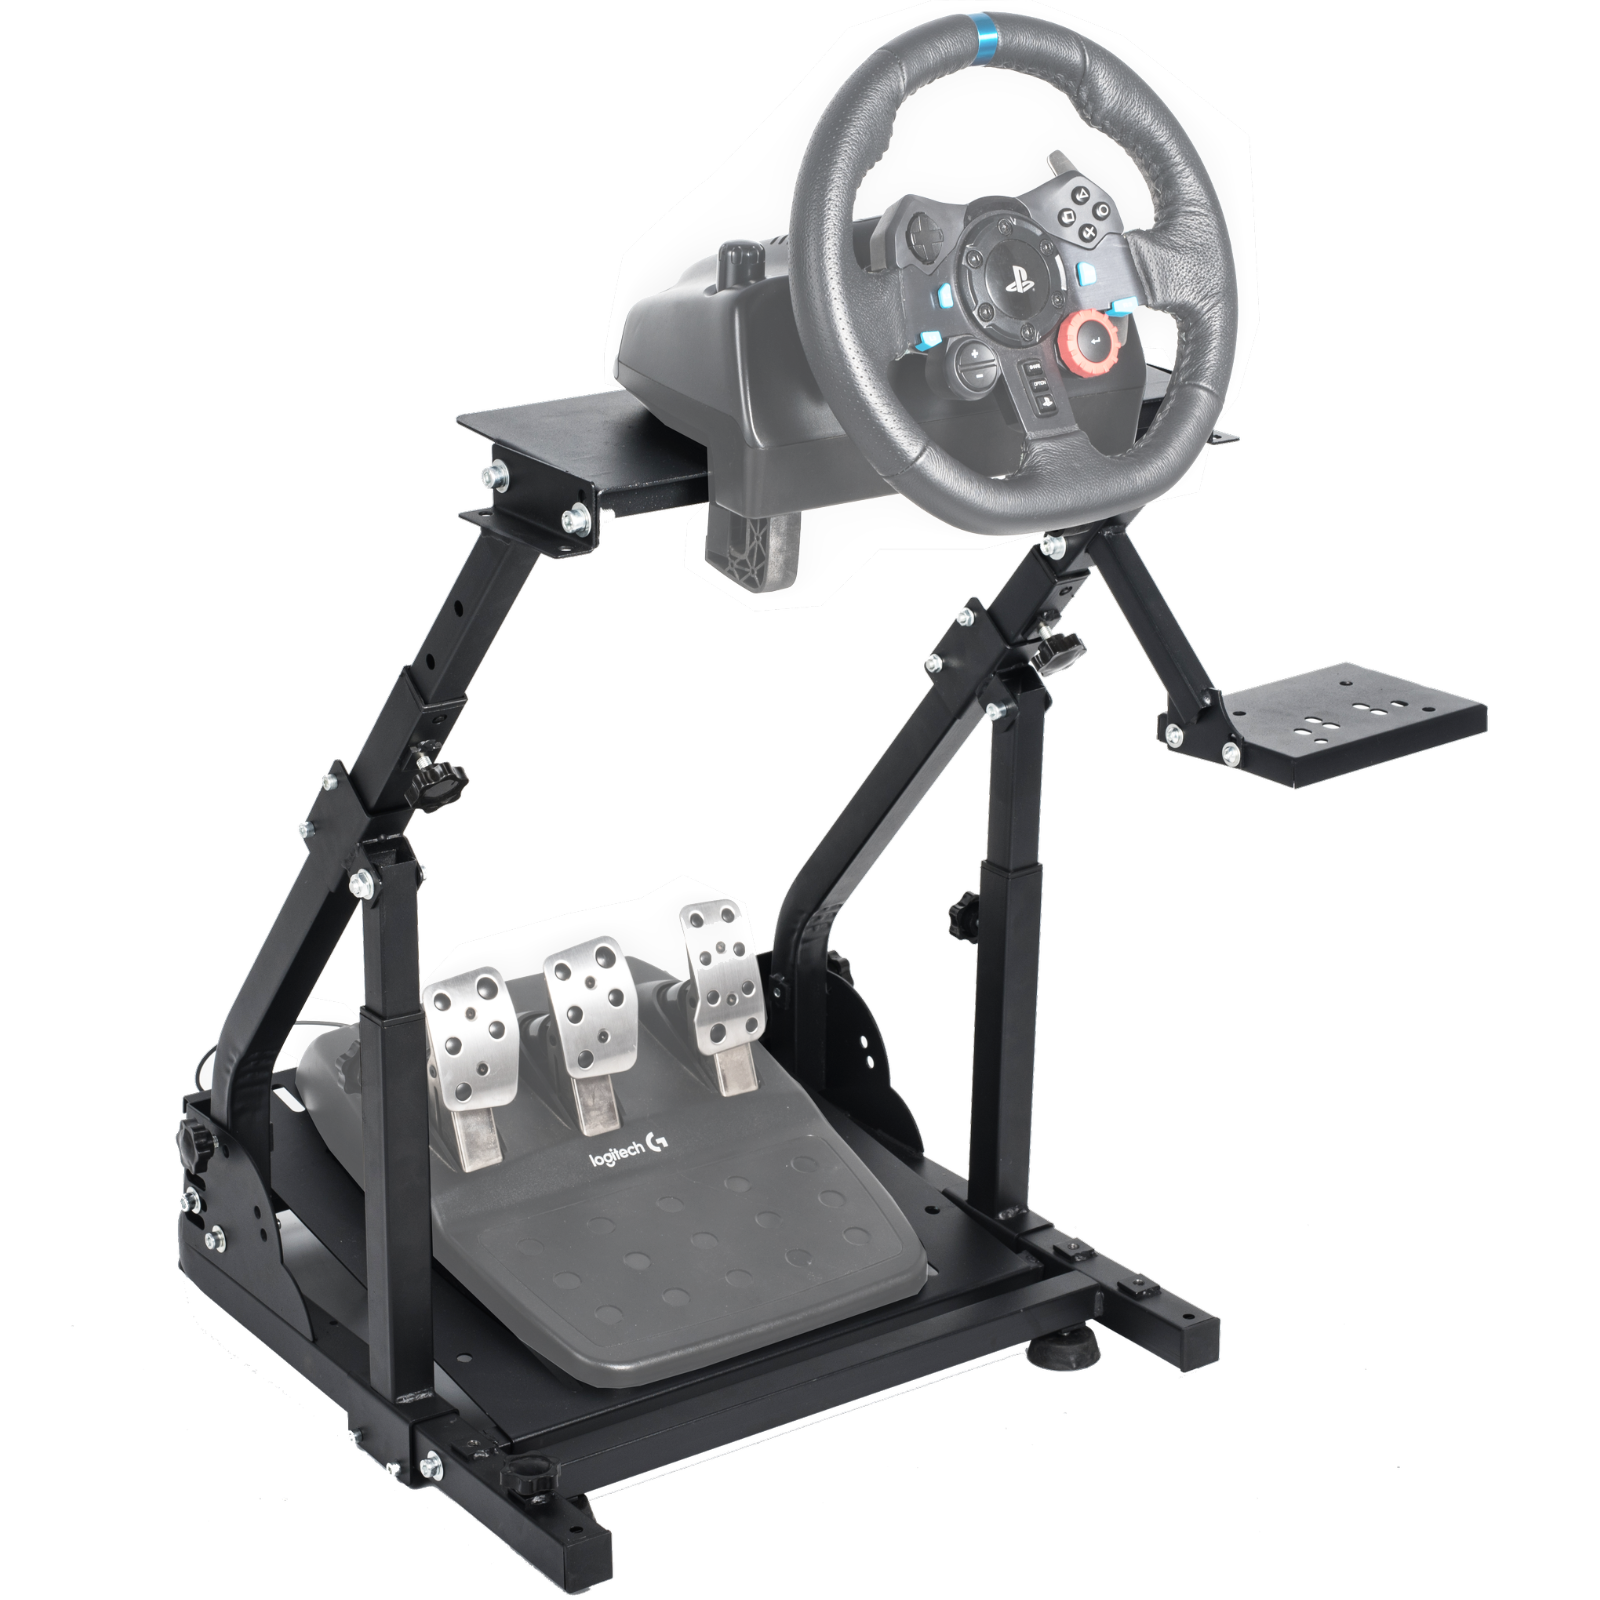 Wheel Stand Pro G Racing Steering Wheel Stand Compatible With Logitech G29,  G923, G920, G27, G25 Wheels, Deluxe, Original V2 Stand. Wheel and Pedals